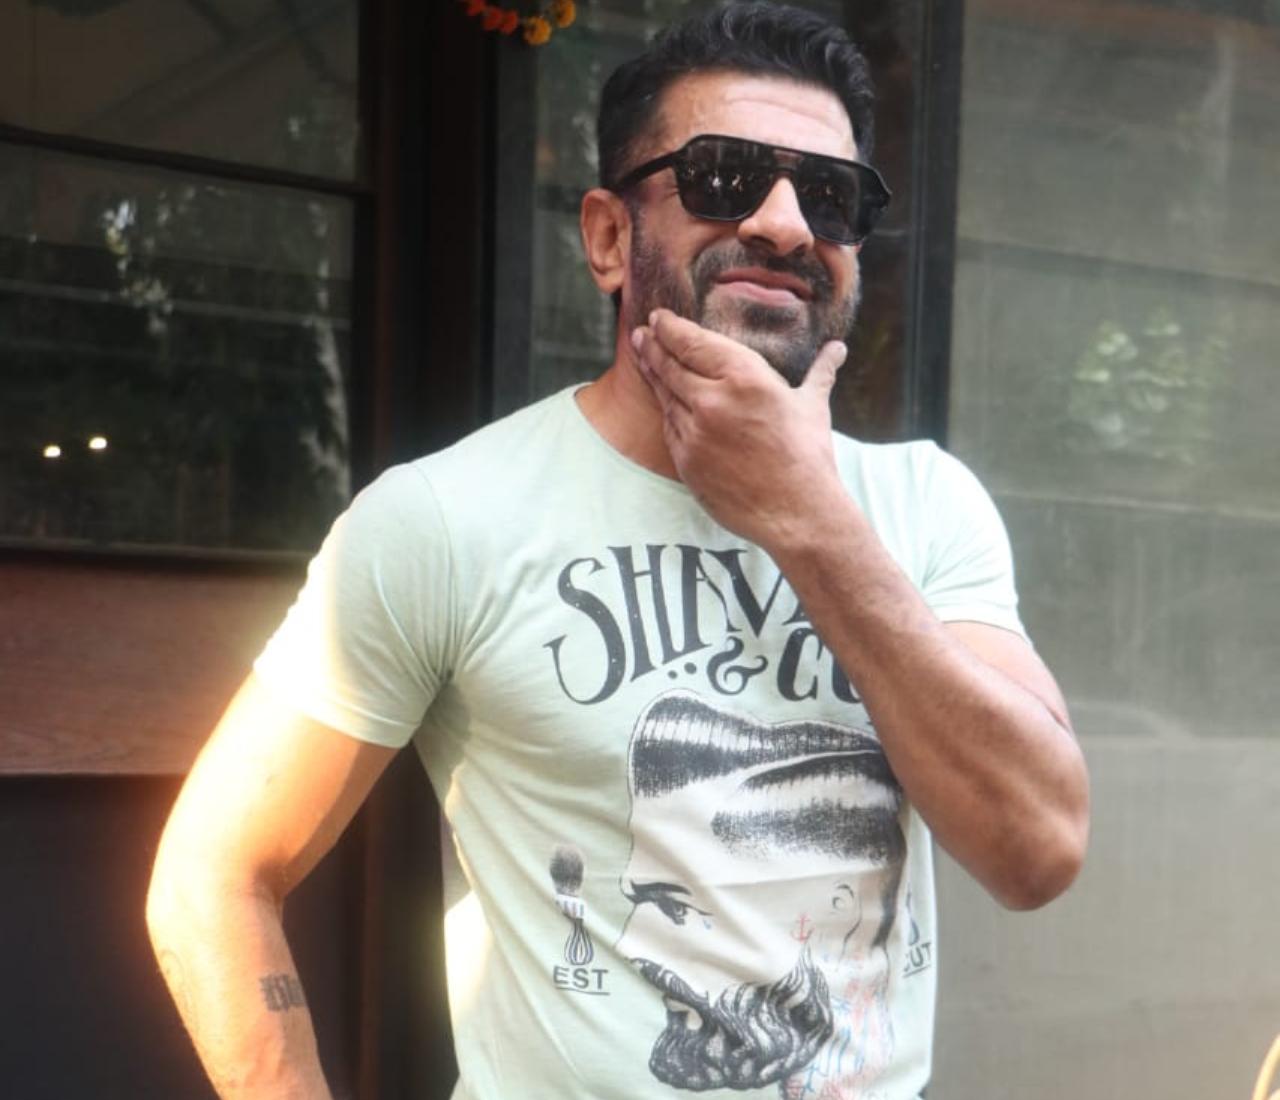 Bigg Boss 14 contestant Eijaz Khan looked cool in his light green t-shirt and pants along with a pair of glares.